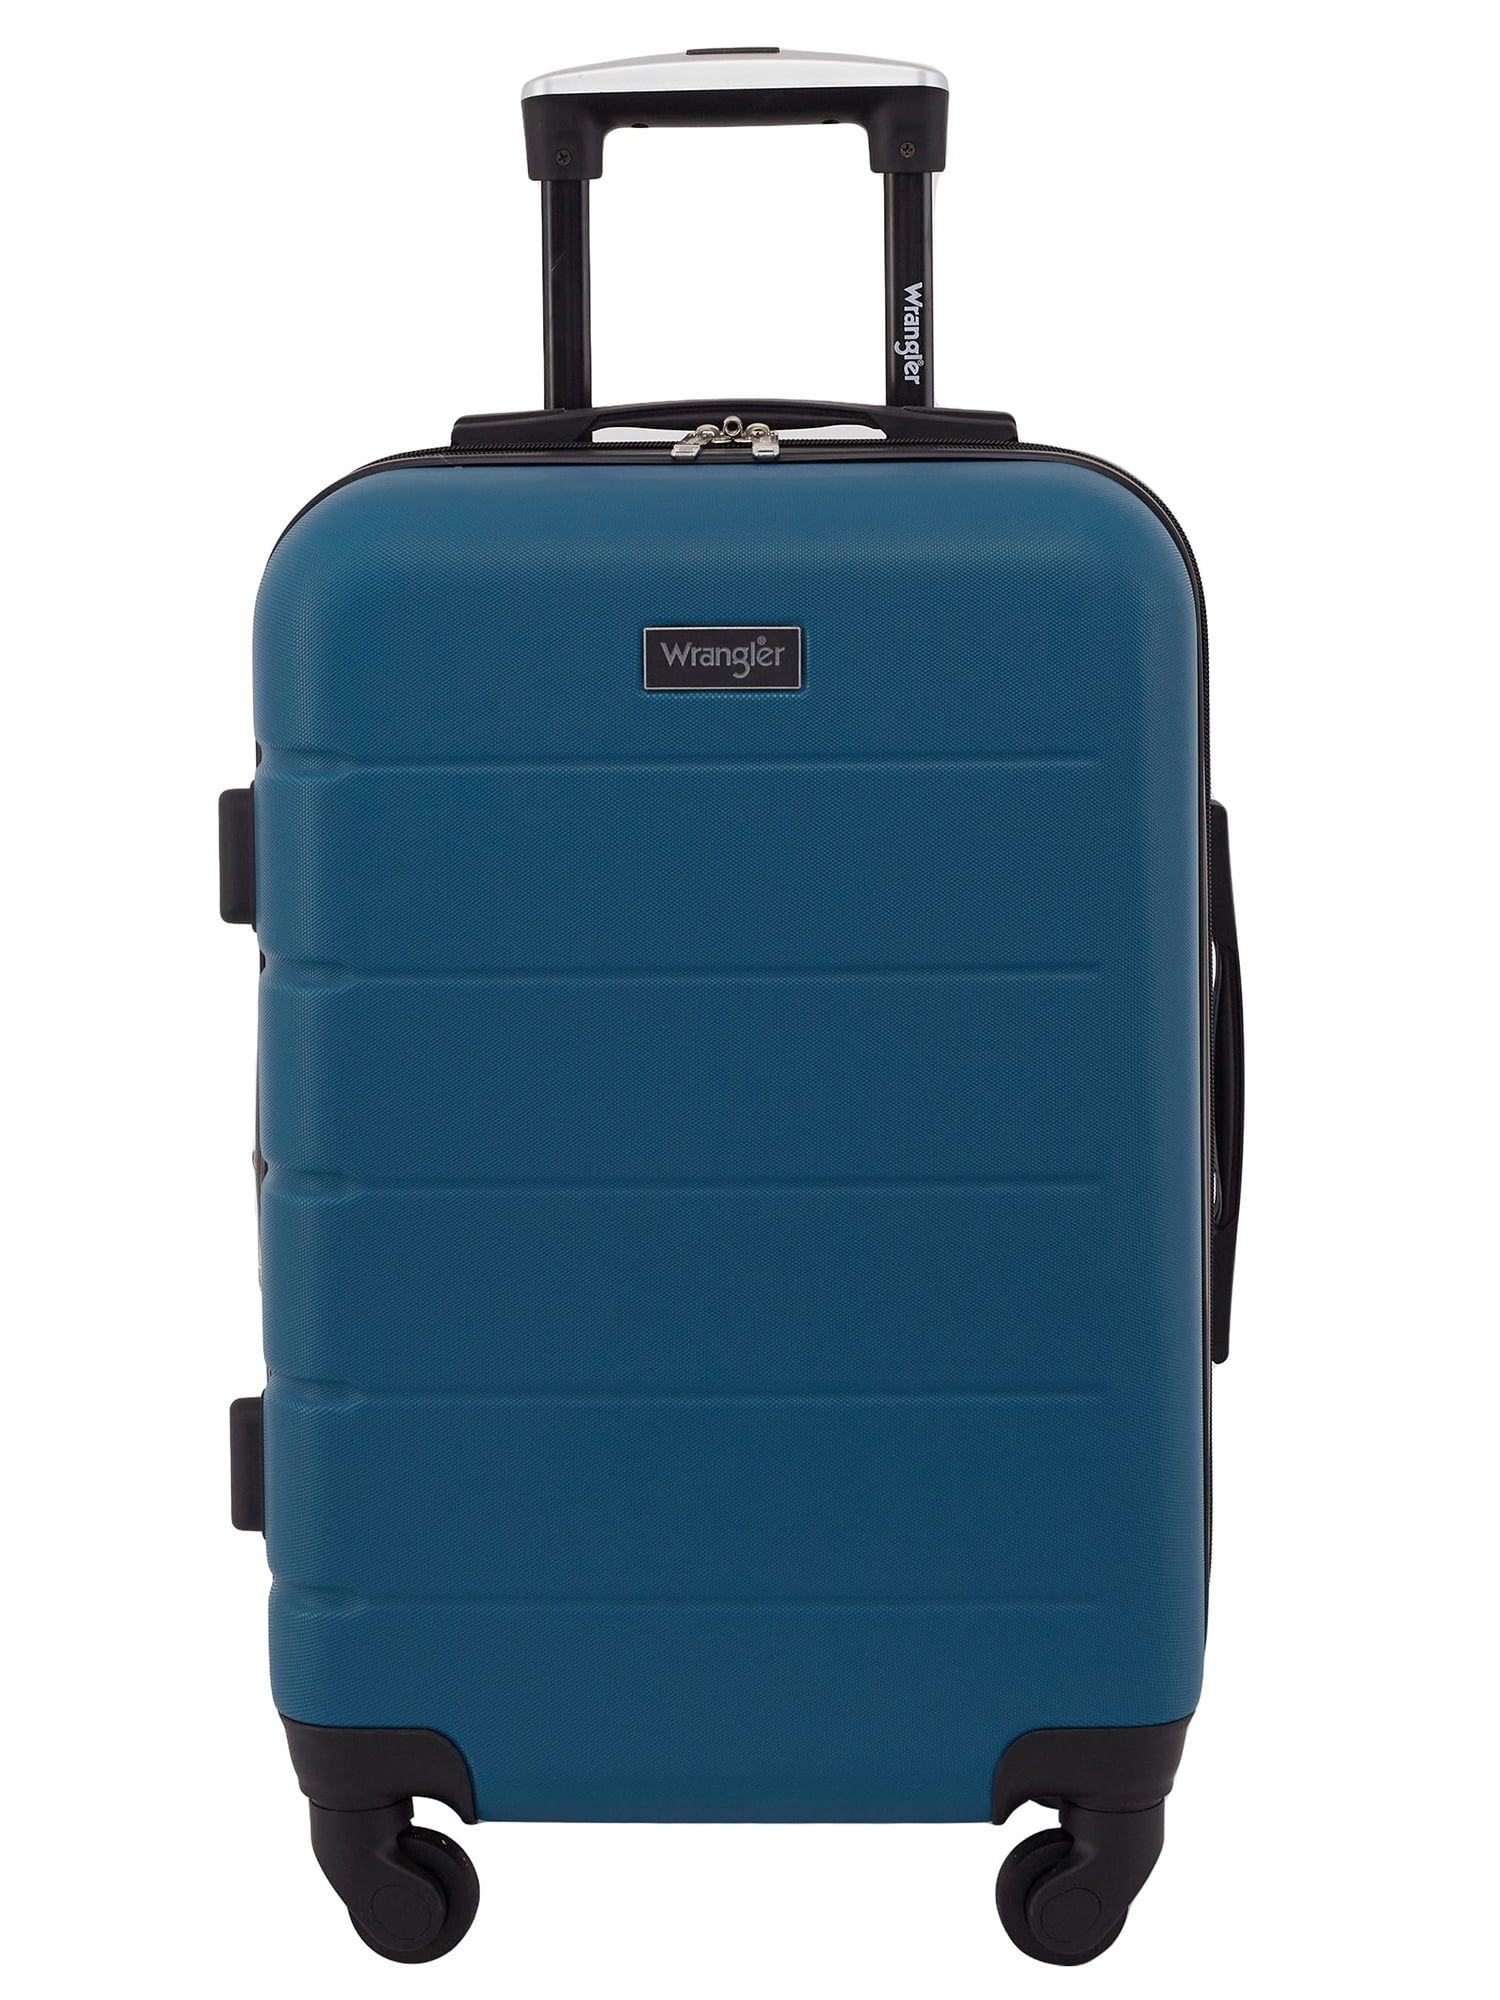 Wrangler 20" Hard-Side Rolling Carry-0n Luggage w/ Cup Holder, Navy | Walmart (US)